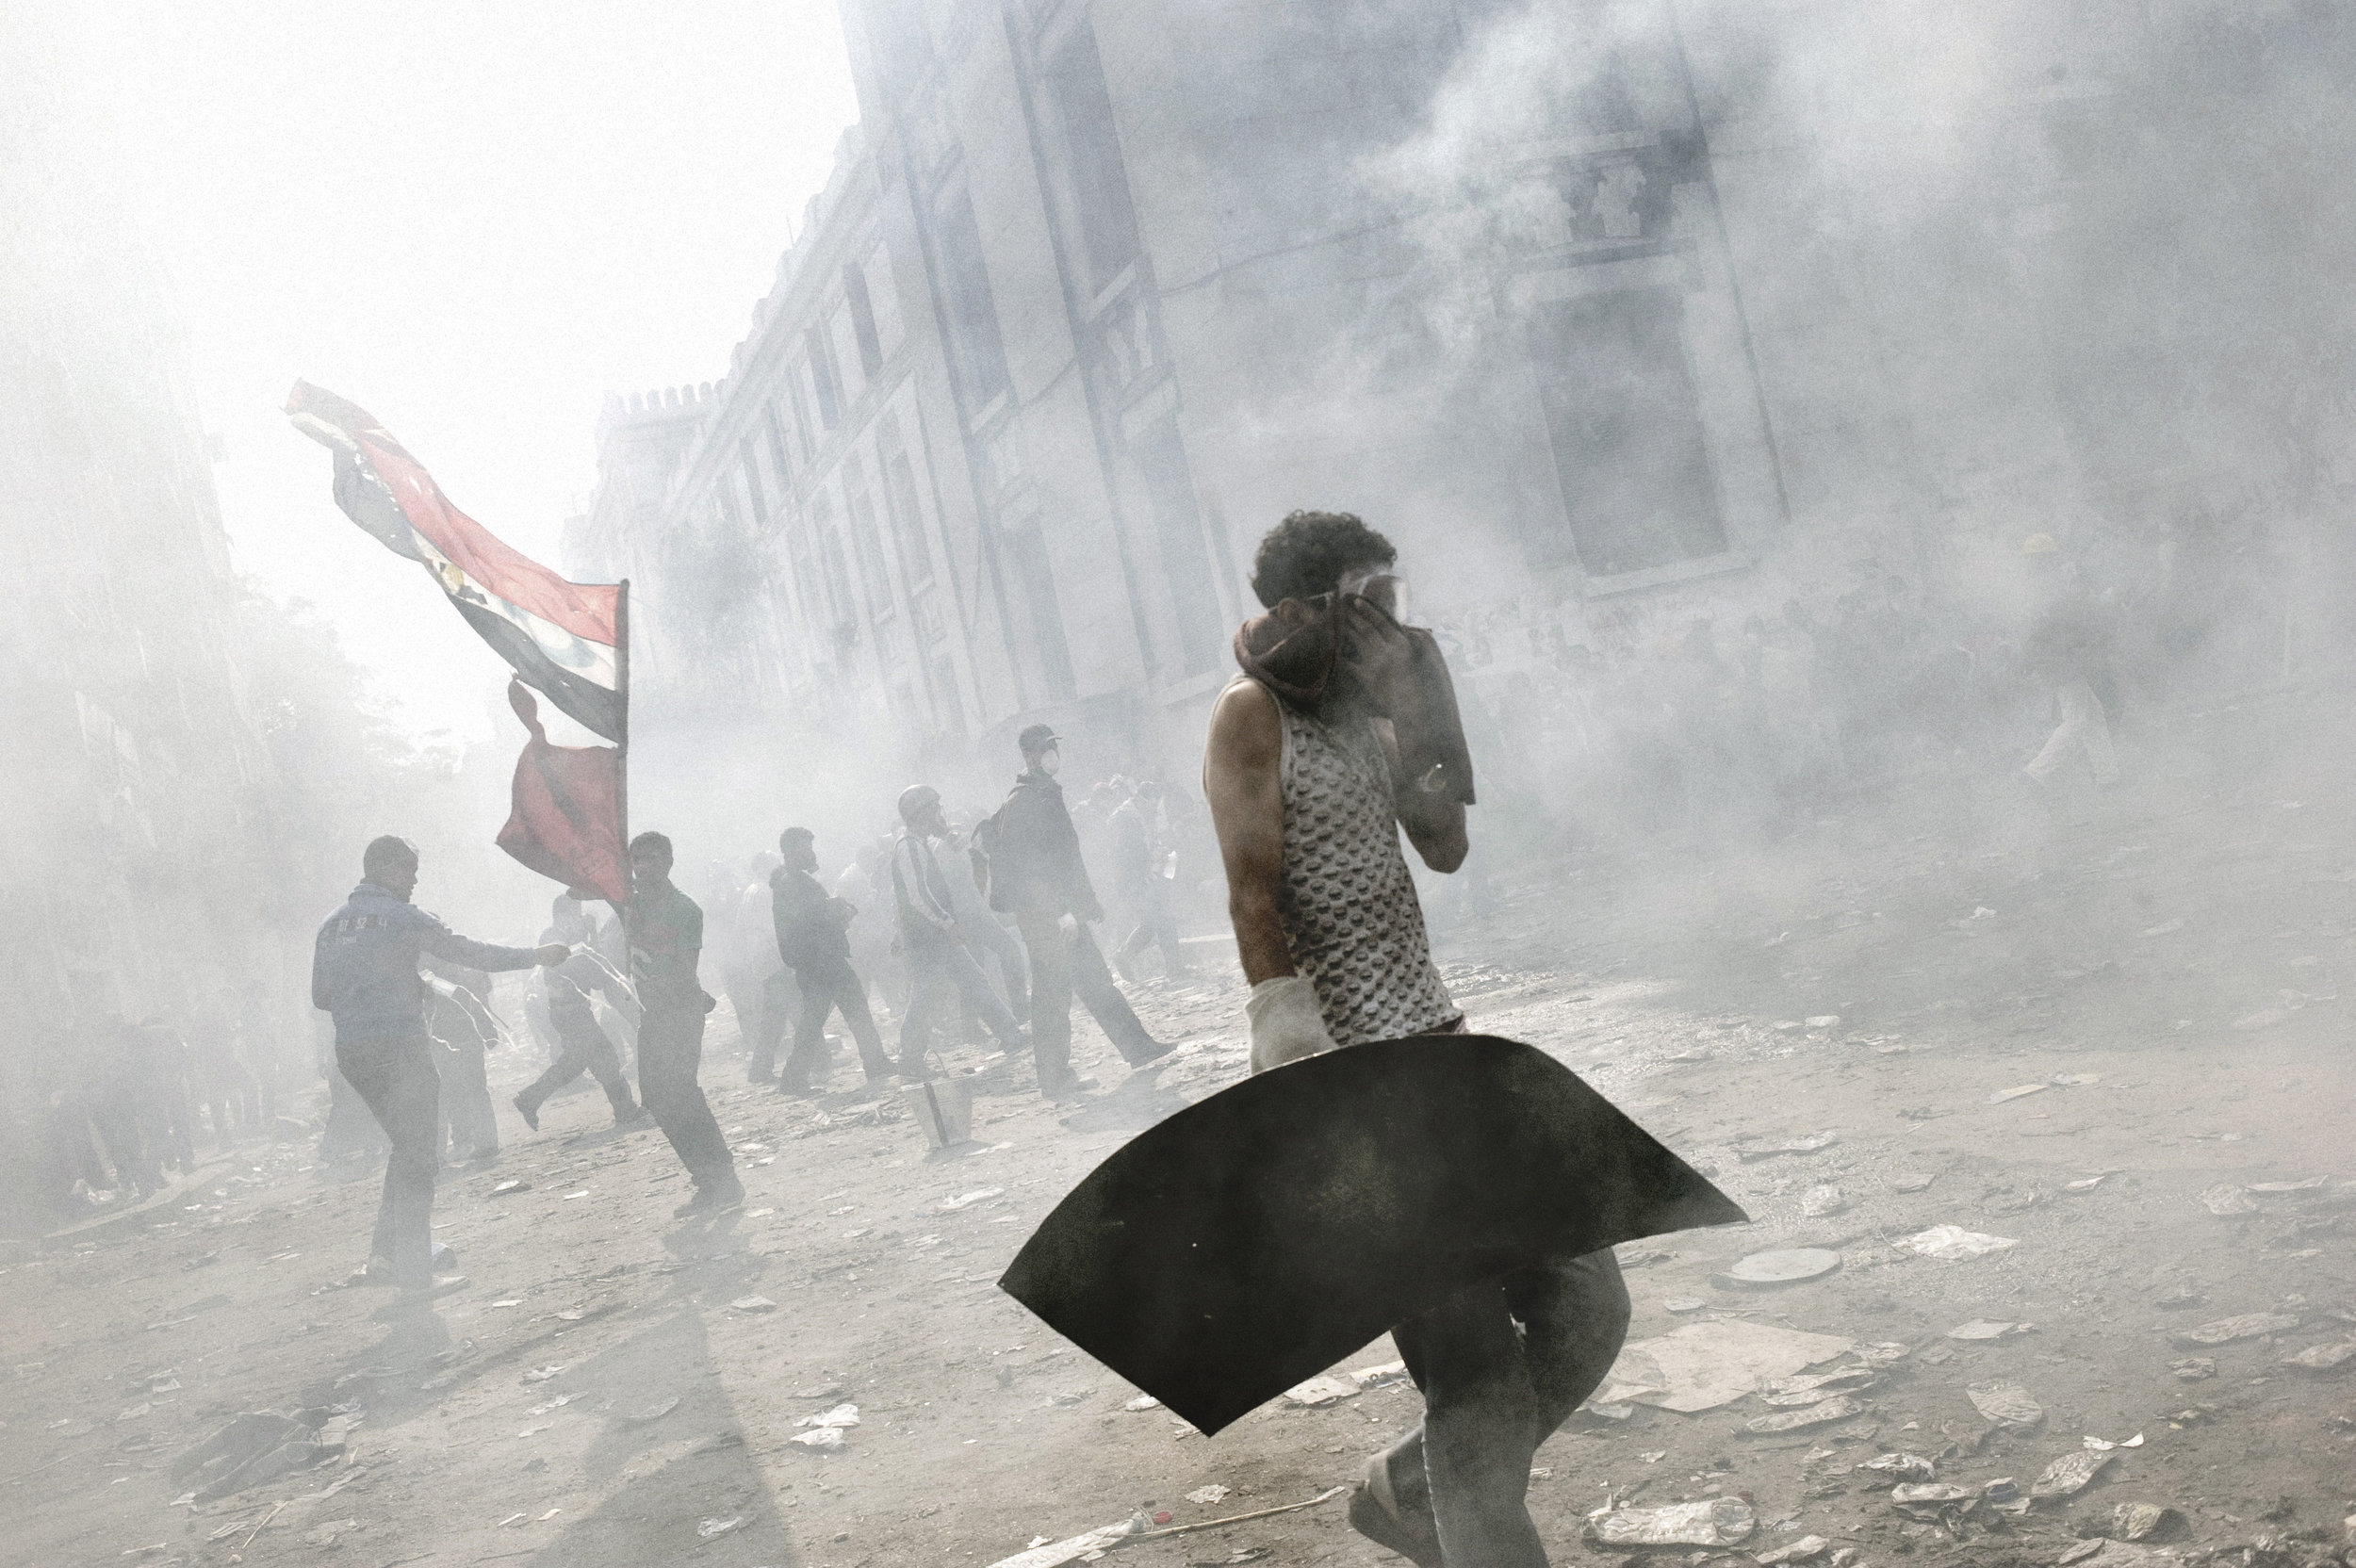  Cairo  Egypt  November 23, 2011: Tear gas fired by Egyptian security forces blankets a group of protesters, November 23, 2011.

 